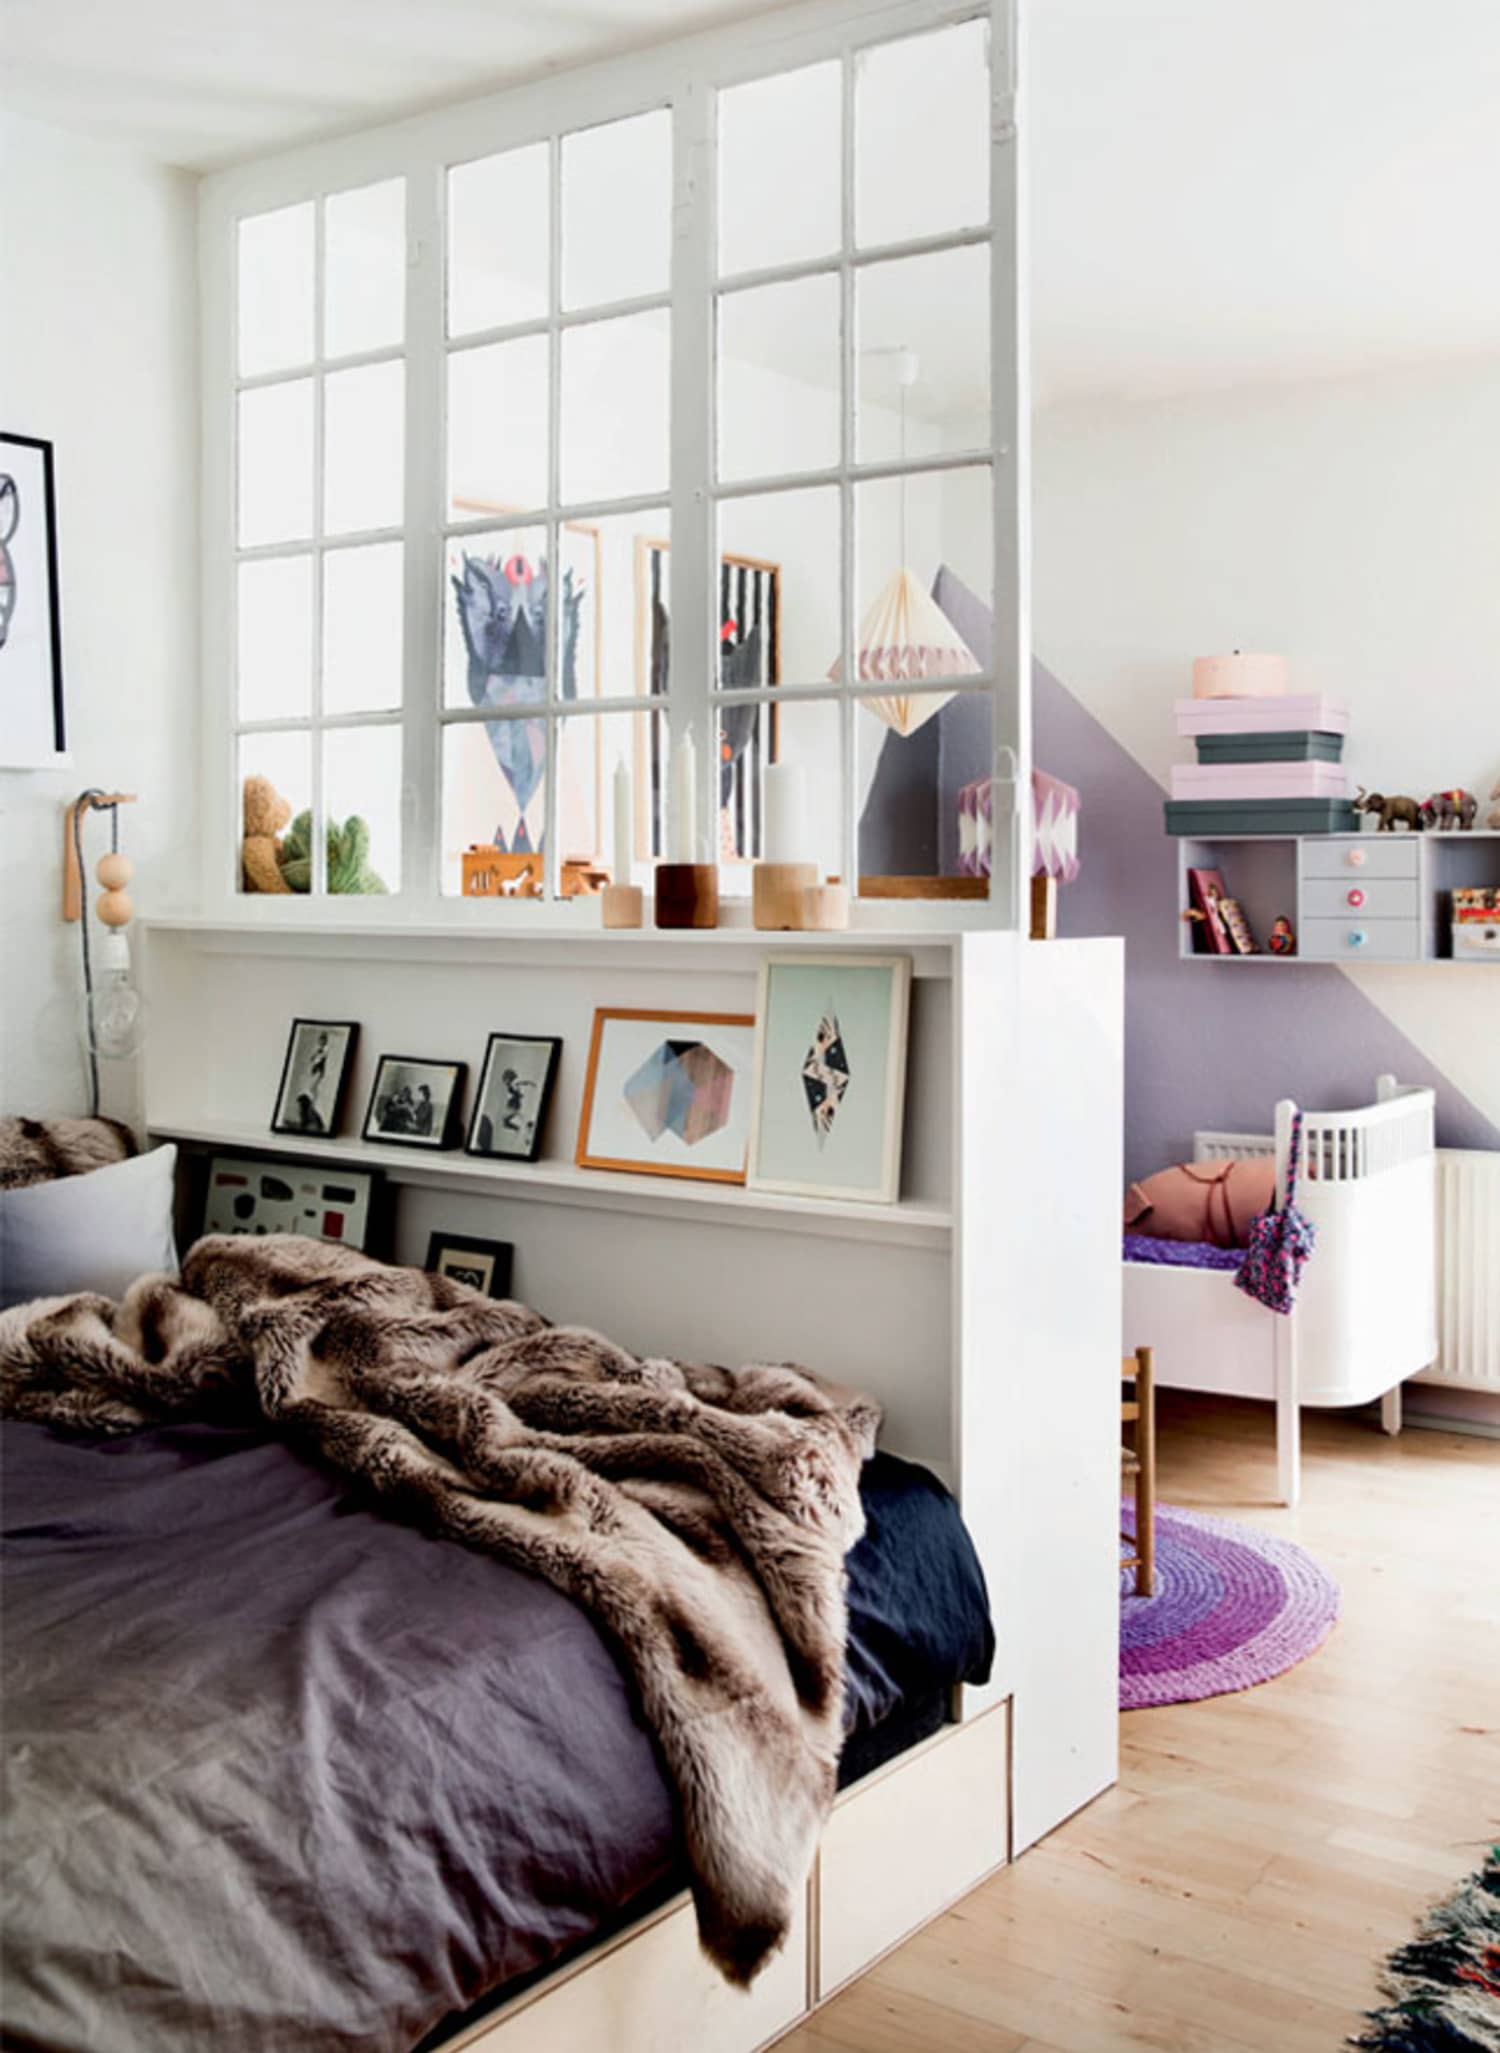 Home "Alone": Small Space Hacks for Creating Privacy At ...